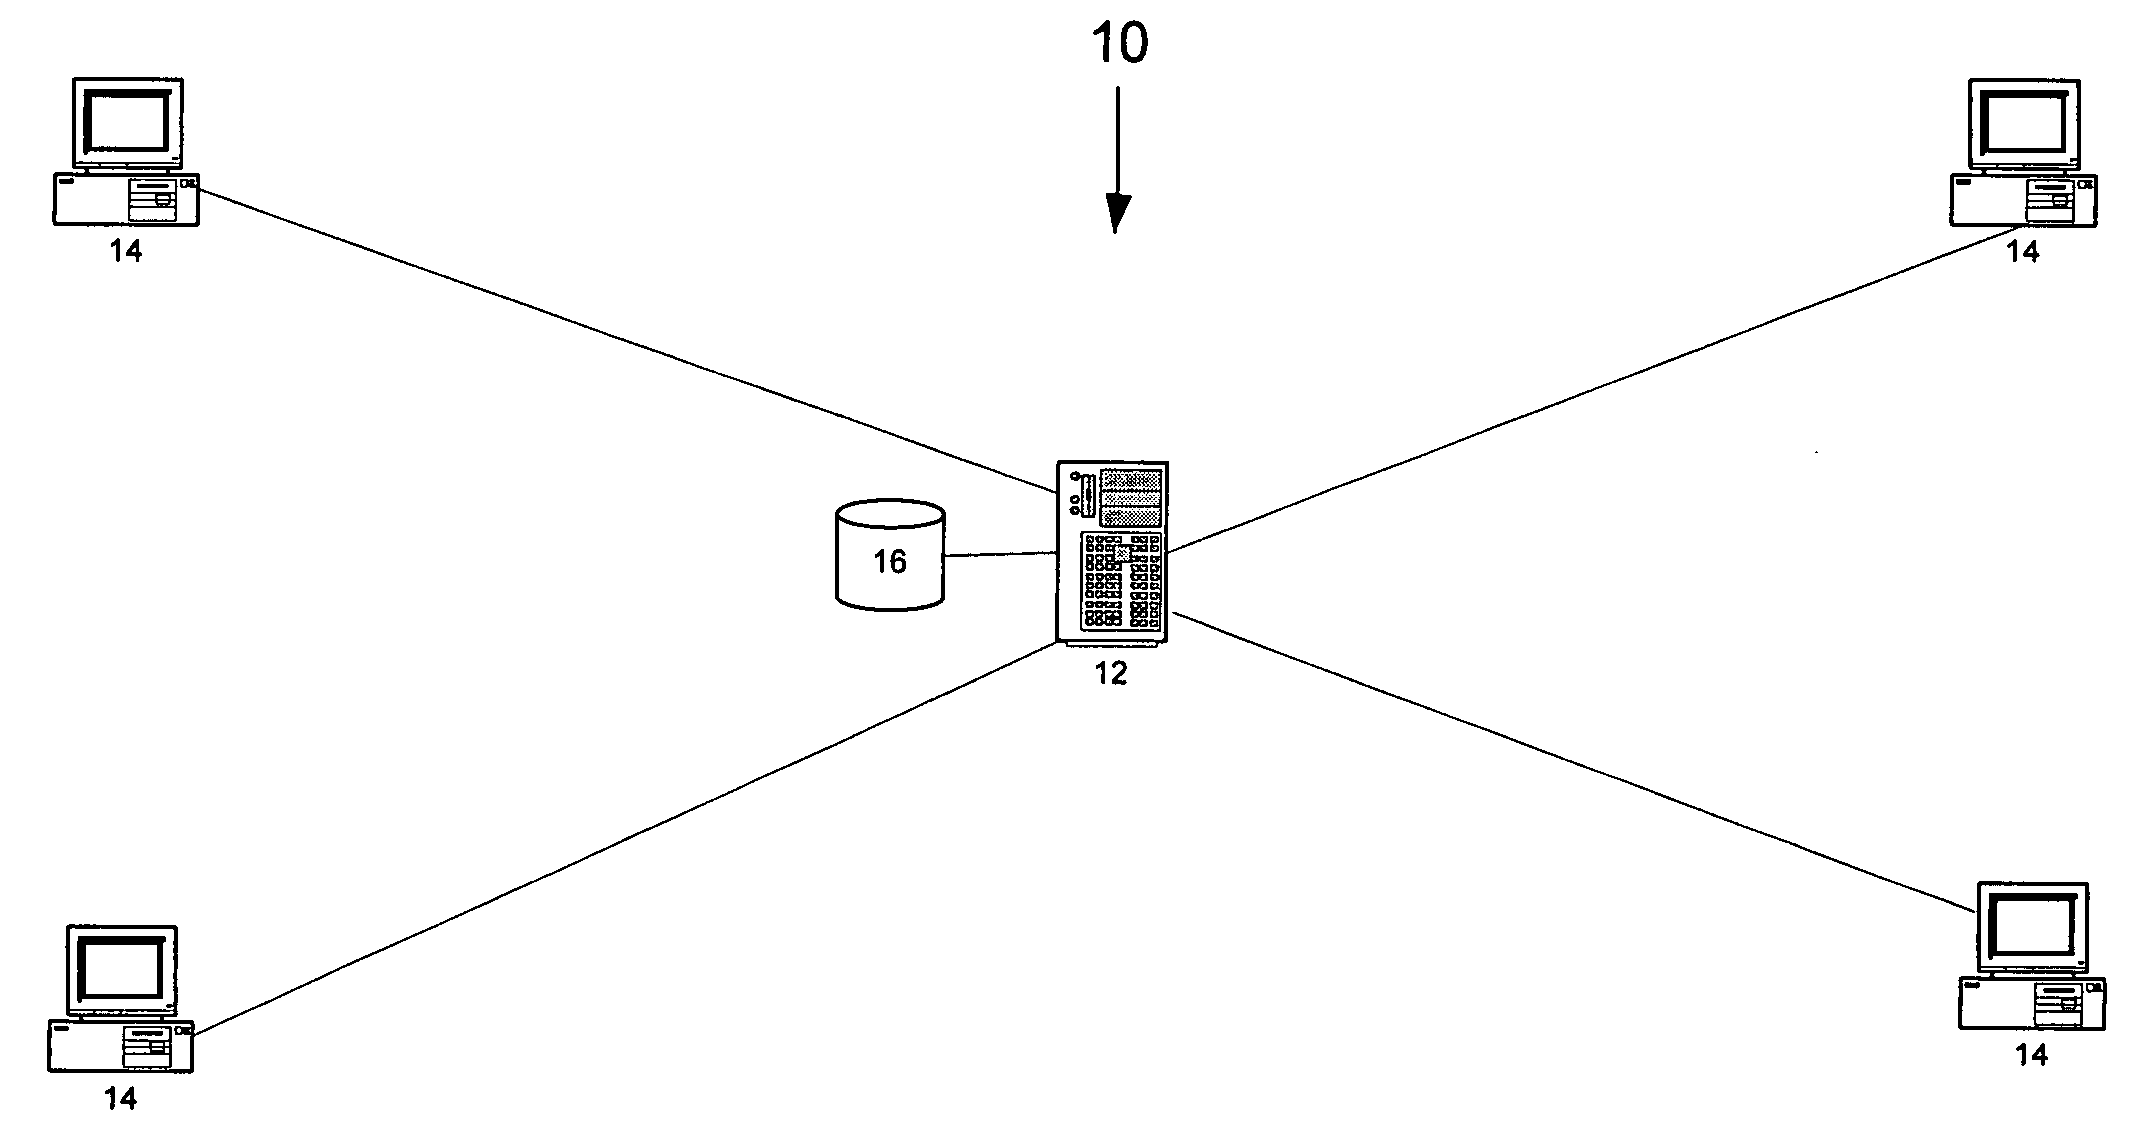 Networked, electronic game tournament method and system